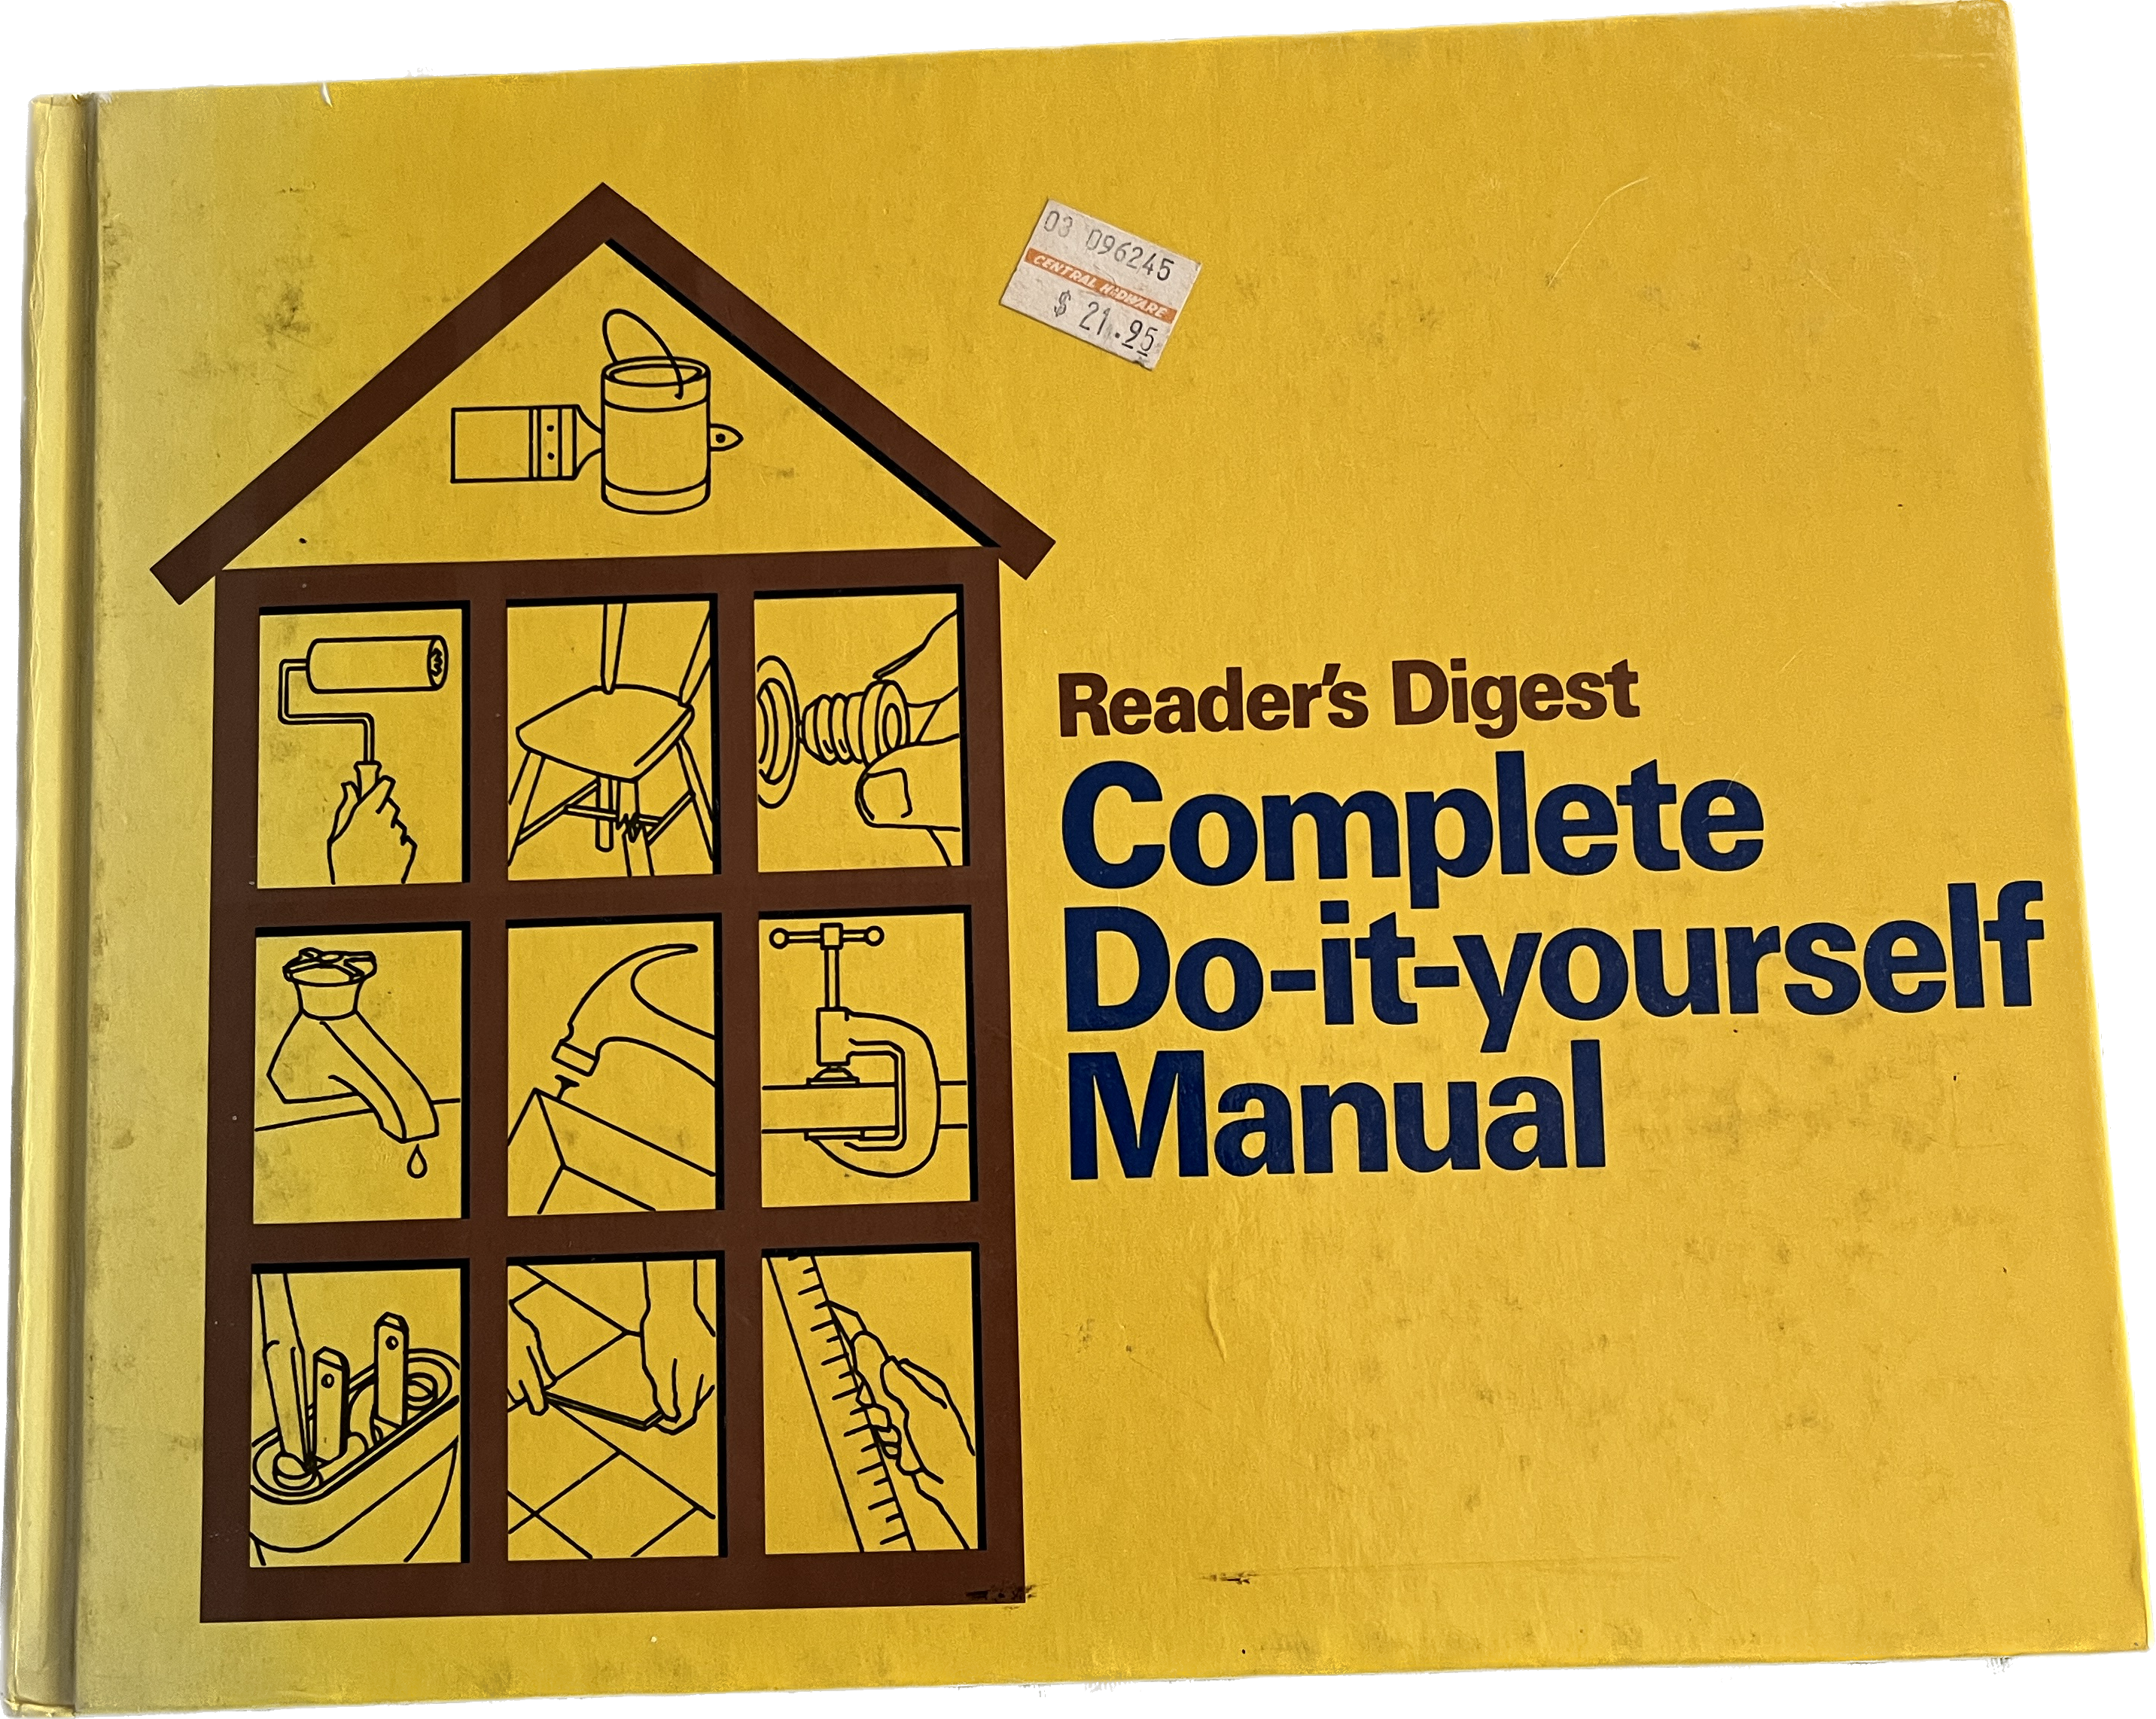 reader's digest complete do-it-yourself manual